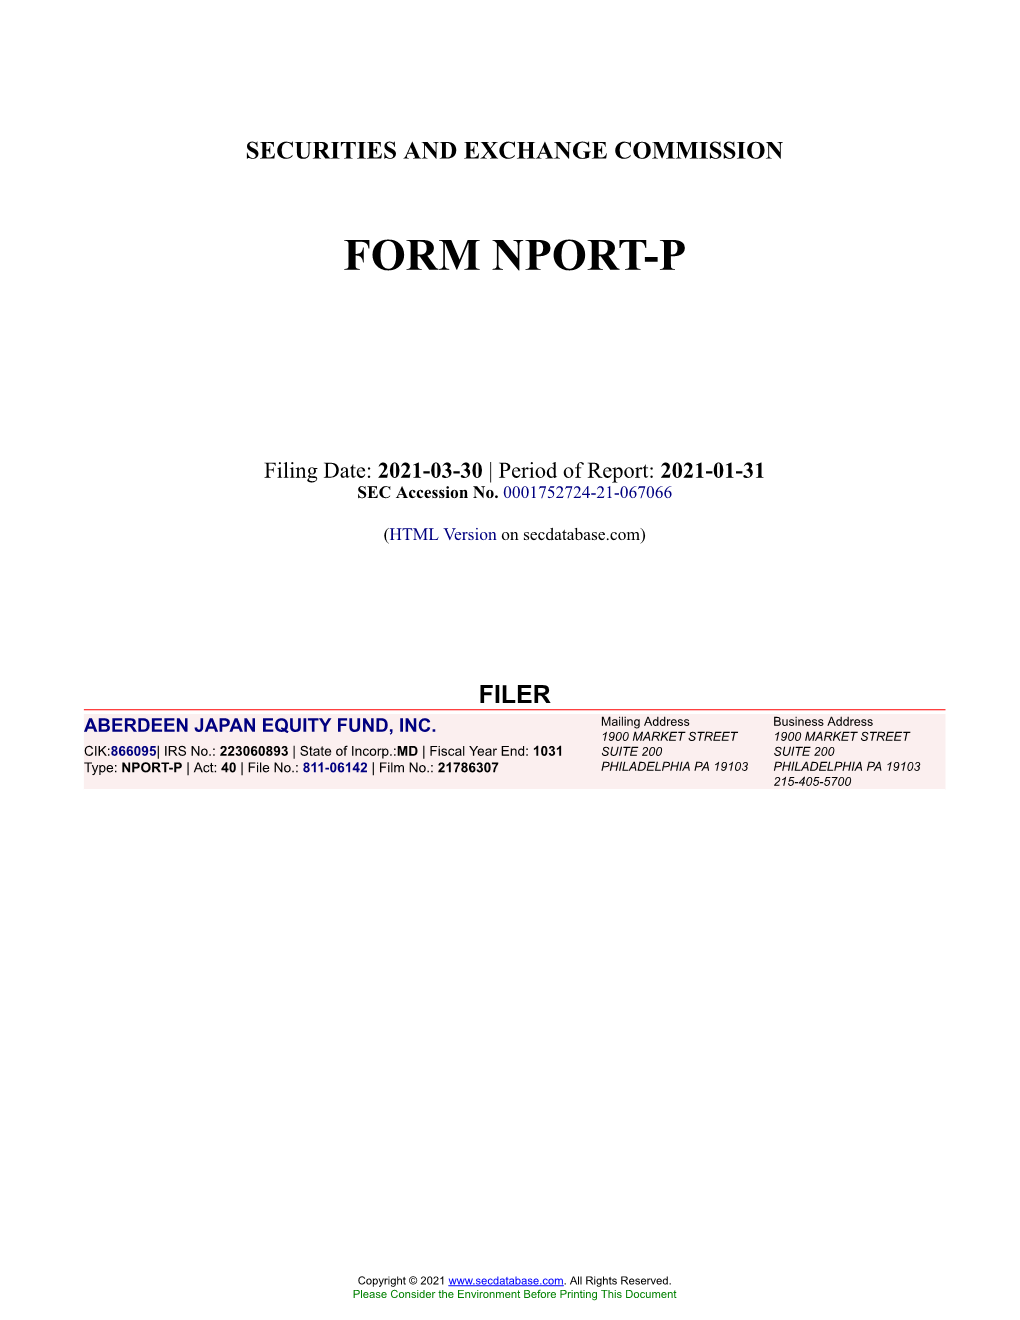 ABERDEEN JAPAN EQUITY FUND, INC. Form NPORT-P Filed 2021-03